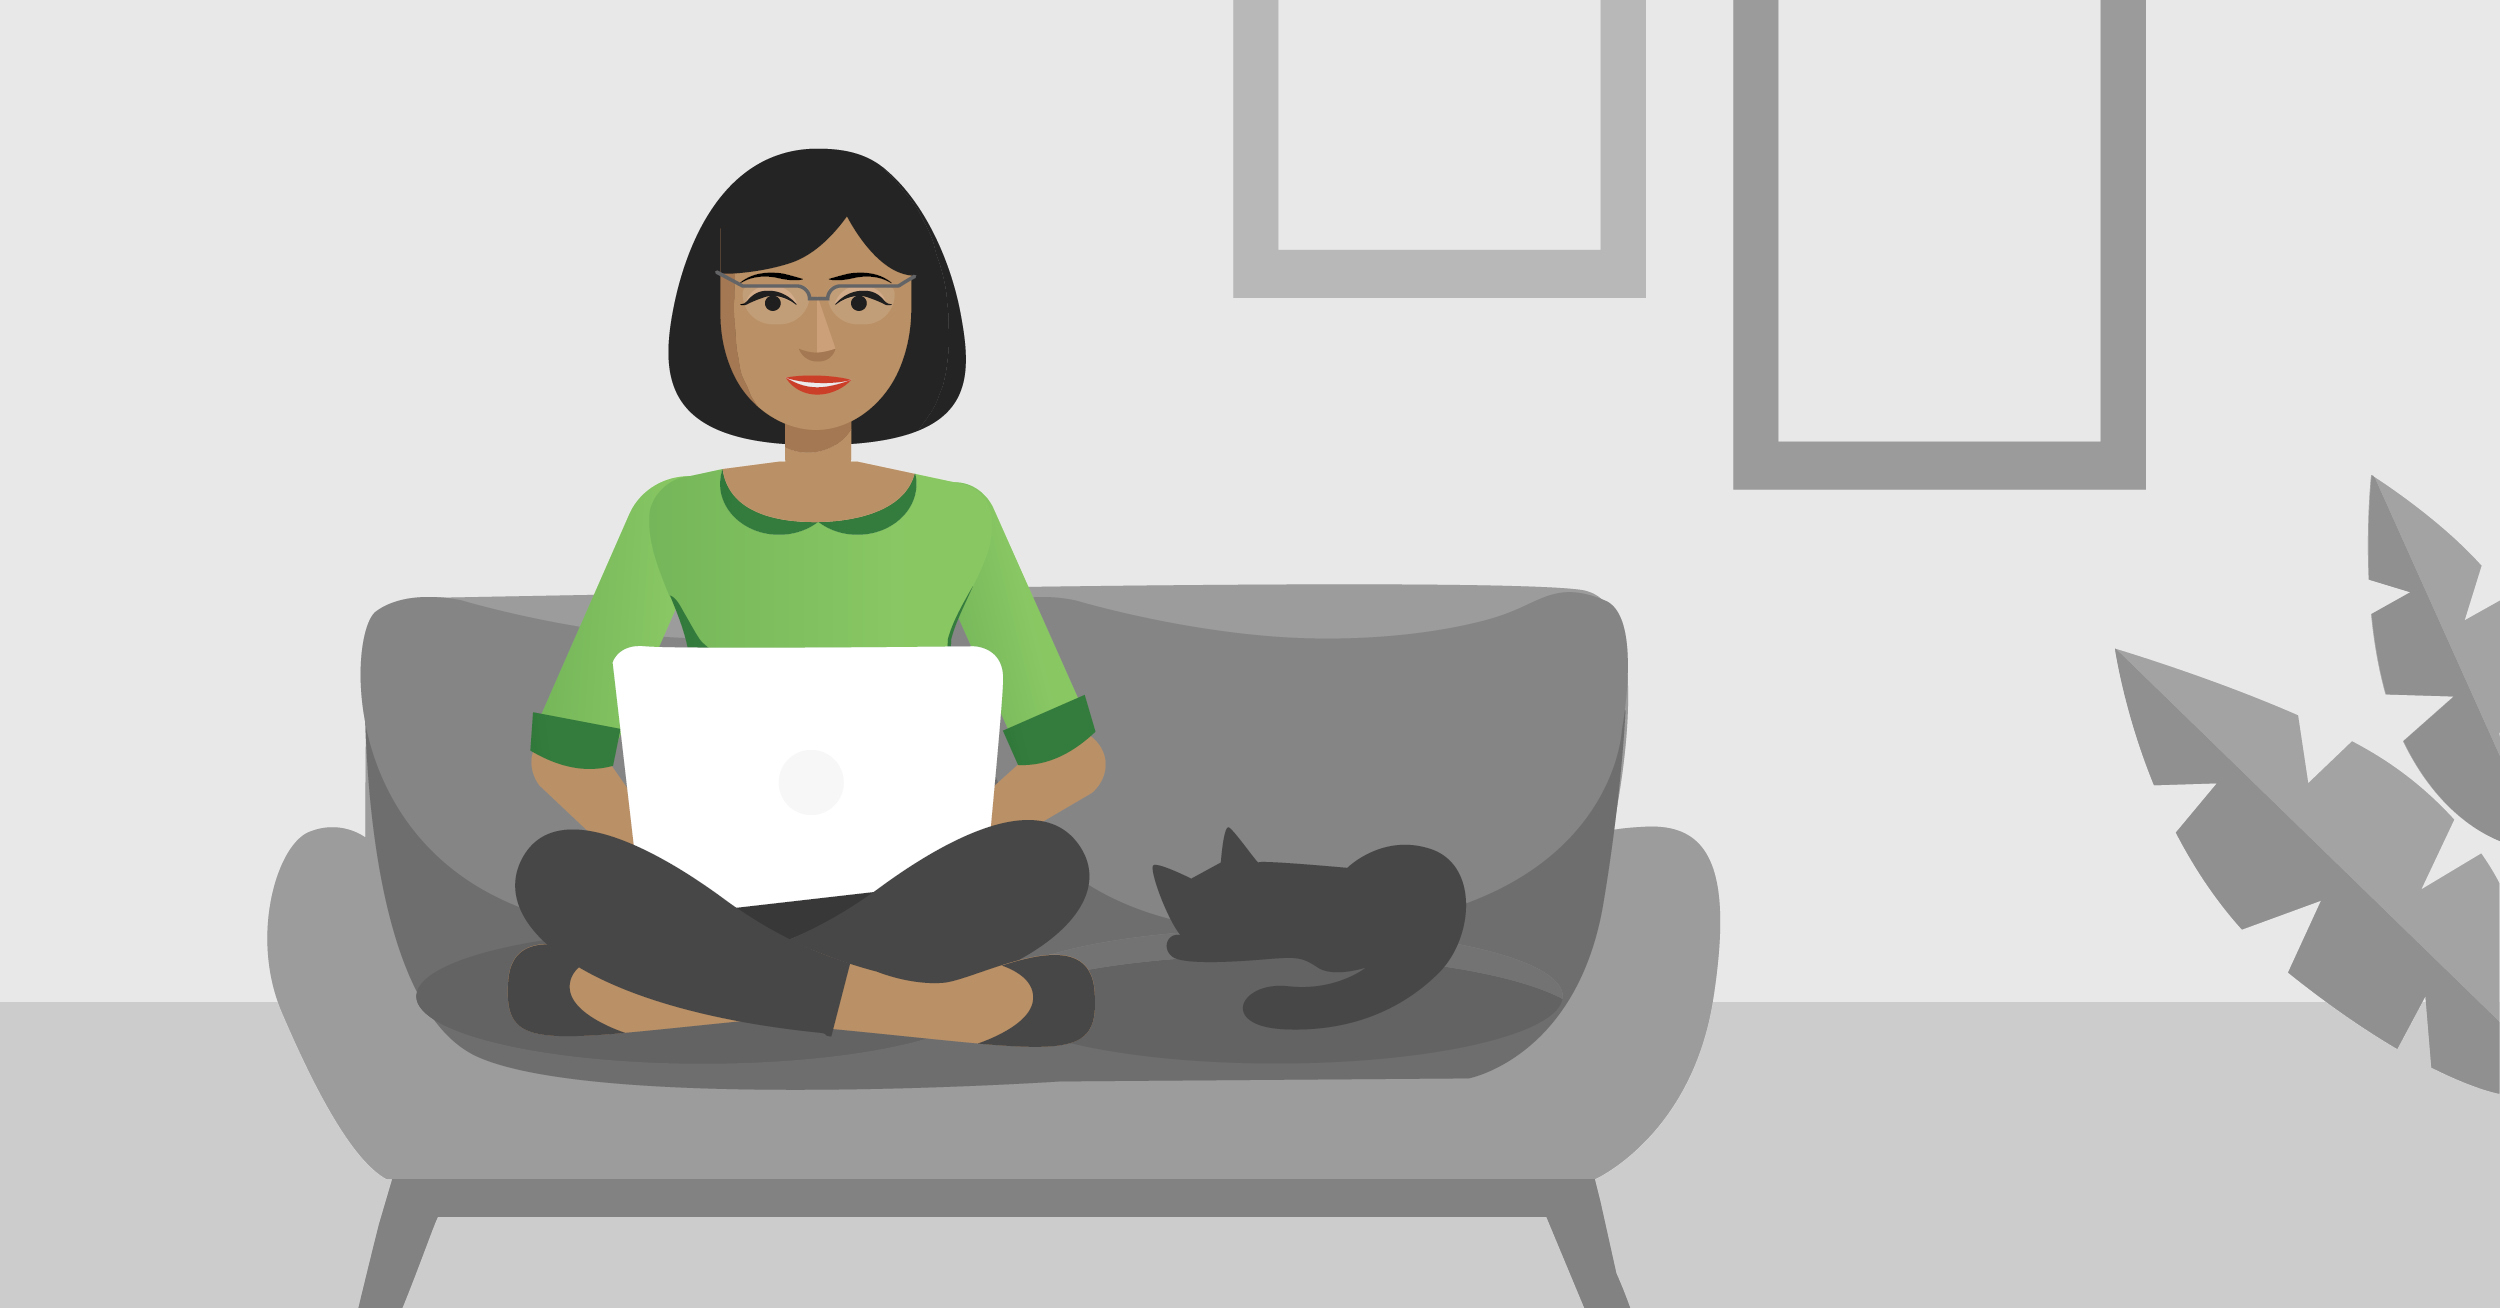 illustration-of-woman-seated-on-couch-while-working-on-laptop-with-cat-sleeping-next-to-her